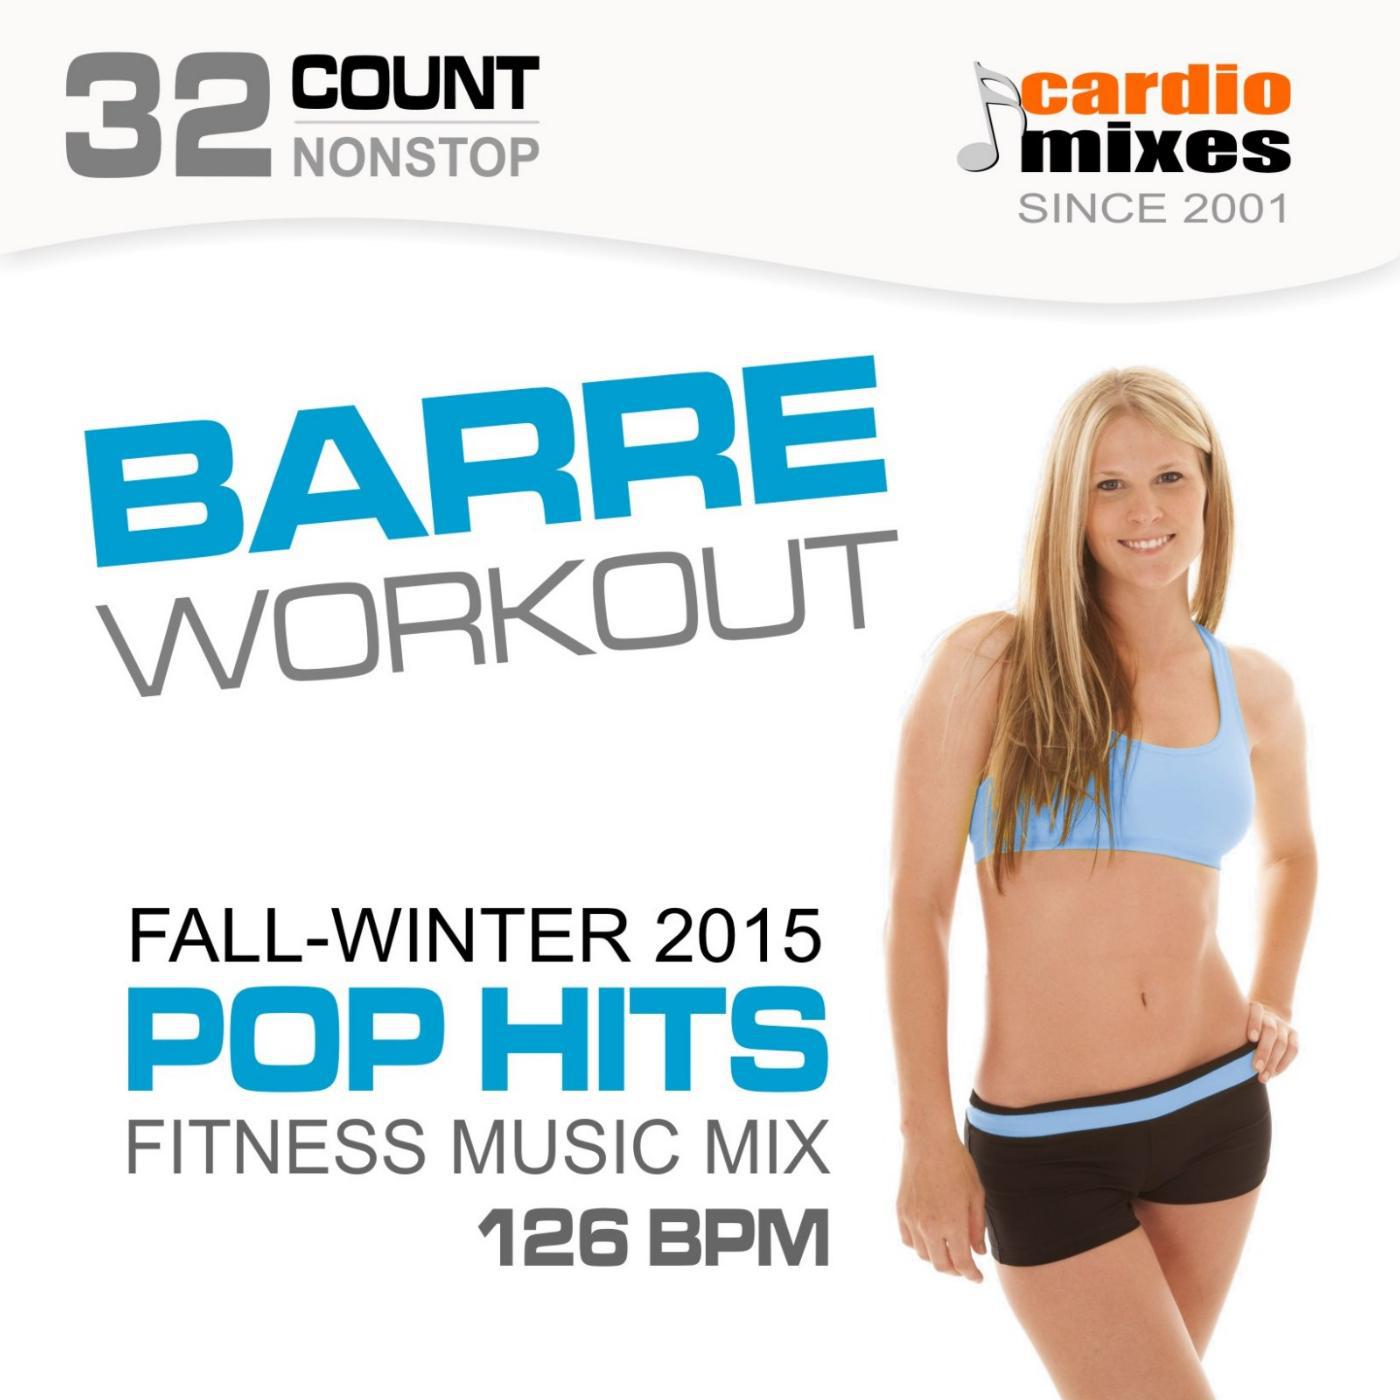 Постер альбома Barre Workout 2015, Pop Hits, Fall & Winter Fitness Music Mix (126 BPM, 32-Count, Nonstop)